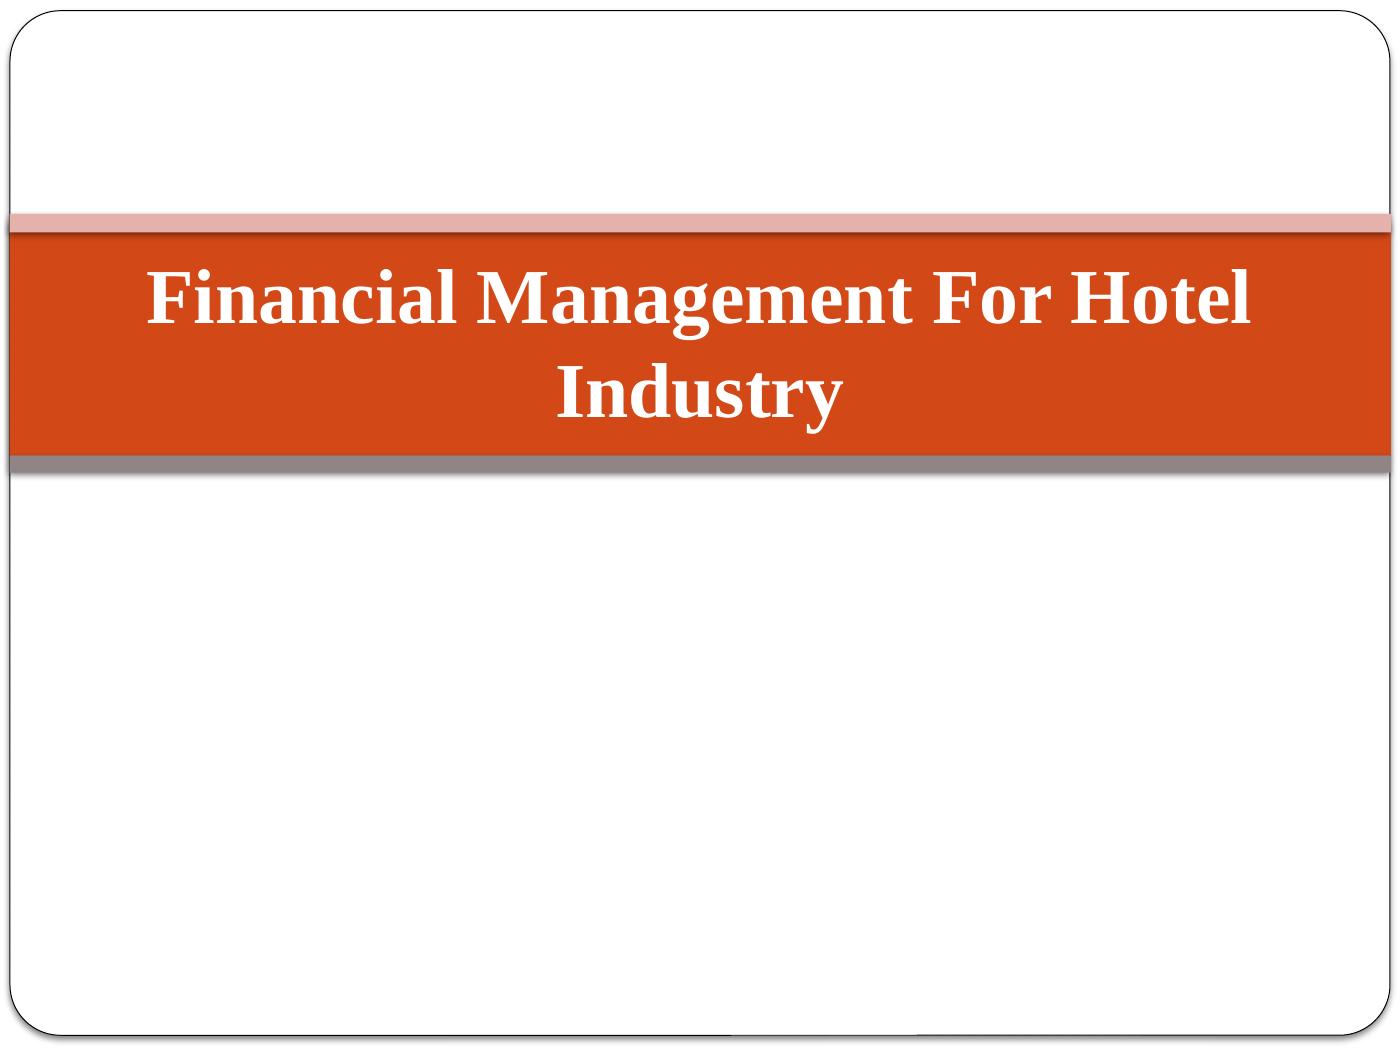 Financial Management For Hotel Industry_1